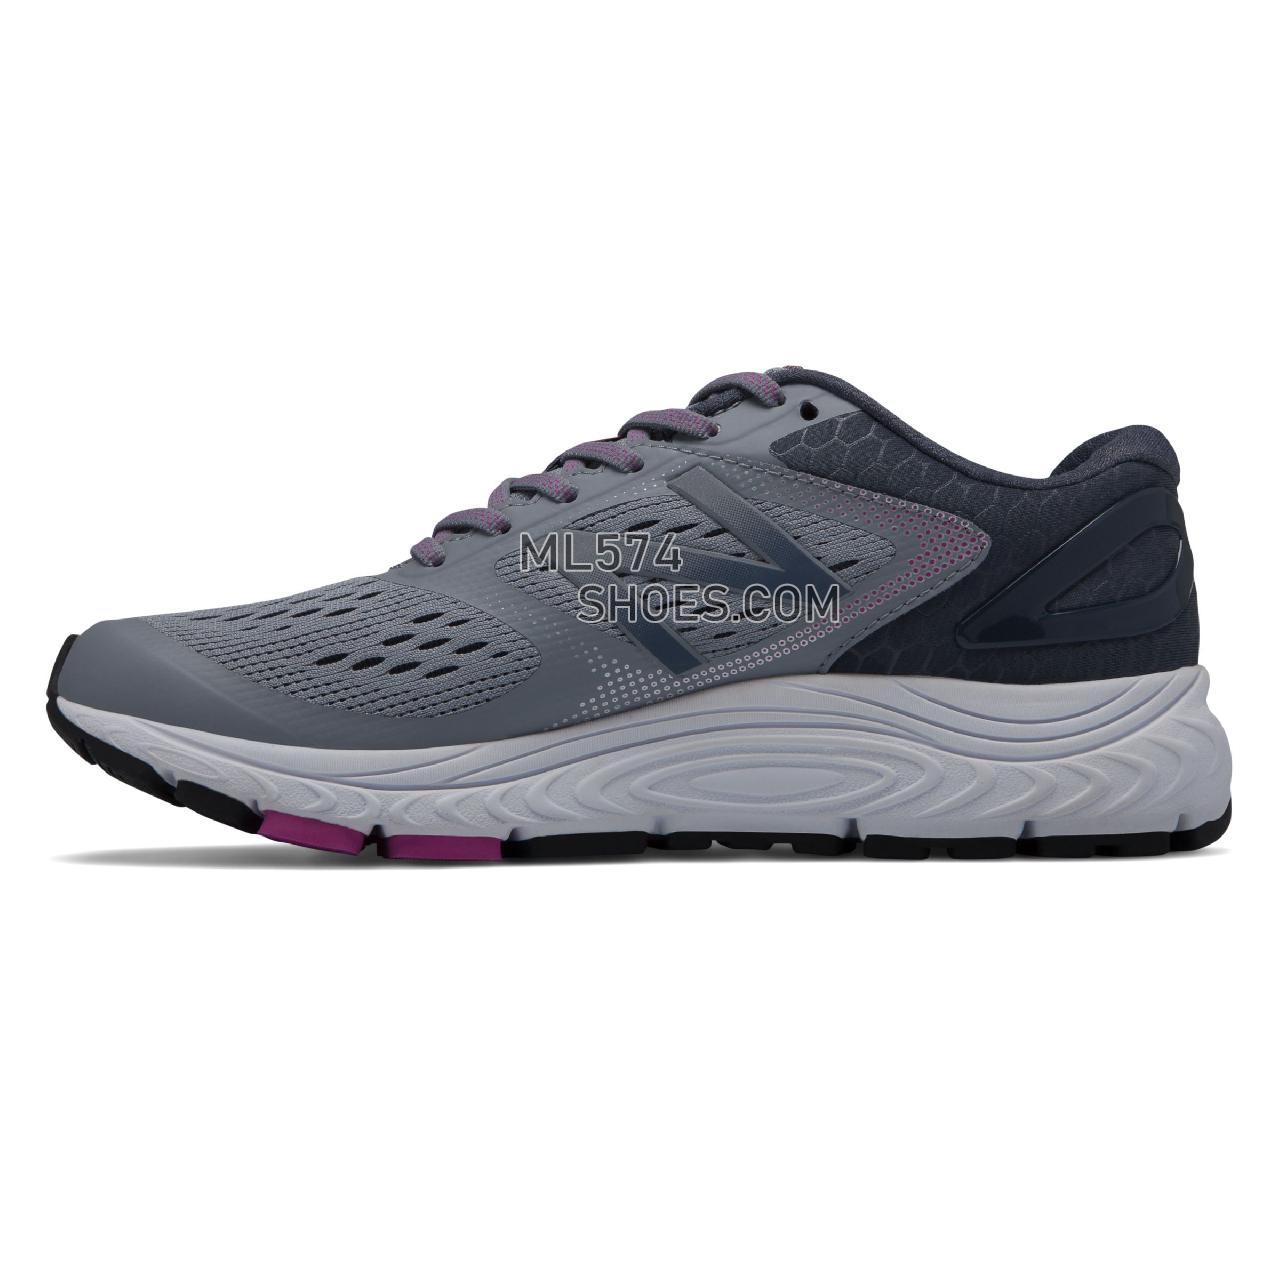 New Balance 840v4 - Women's 840 - Running Cyclone with Poisonberry - W840GO4